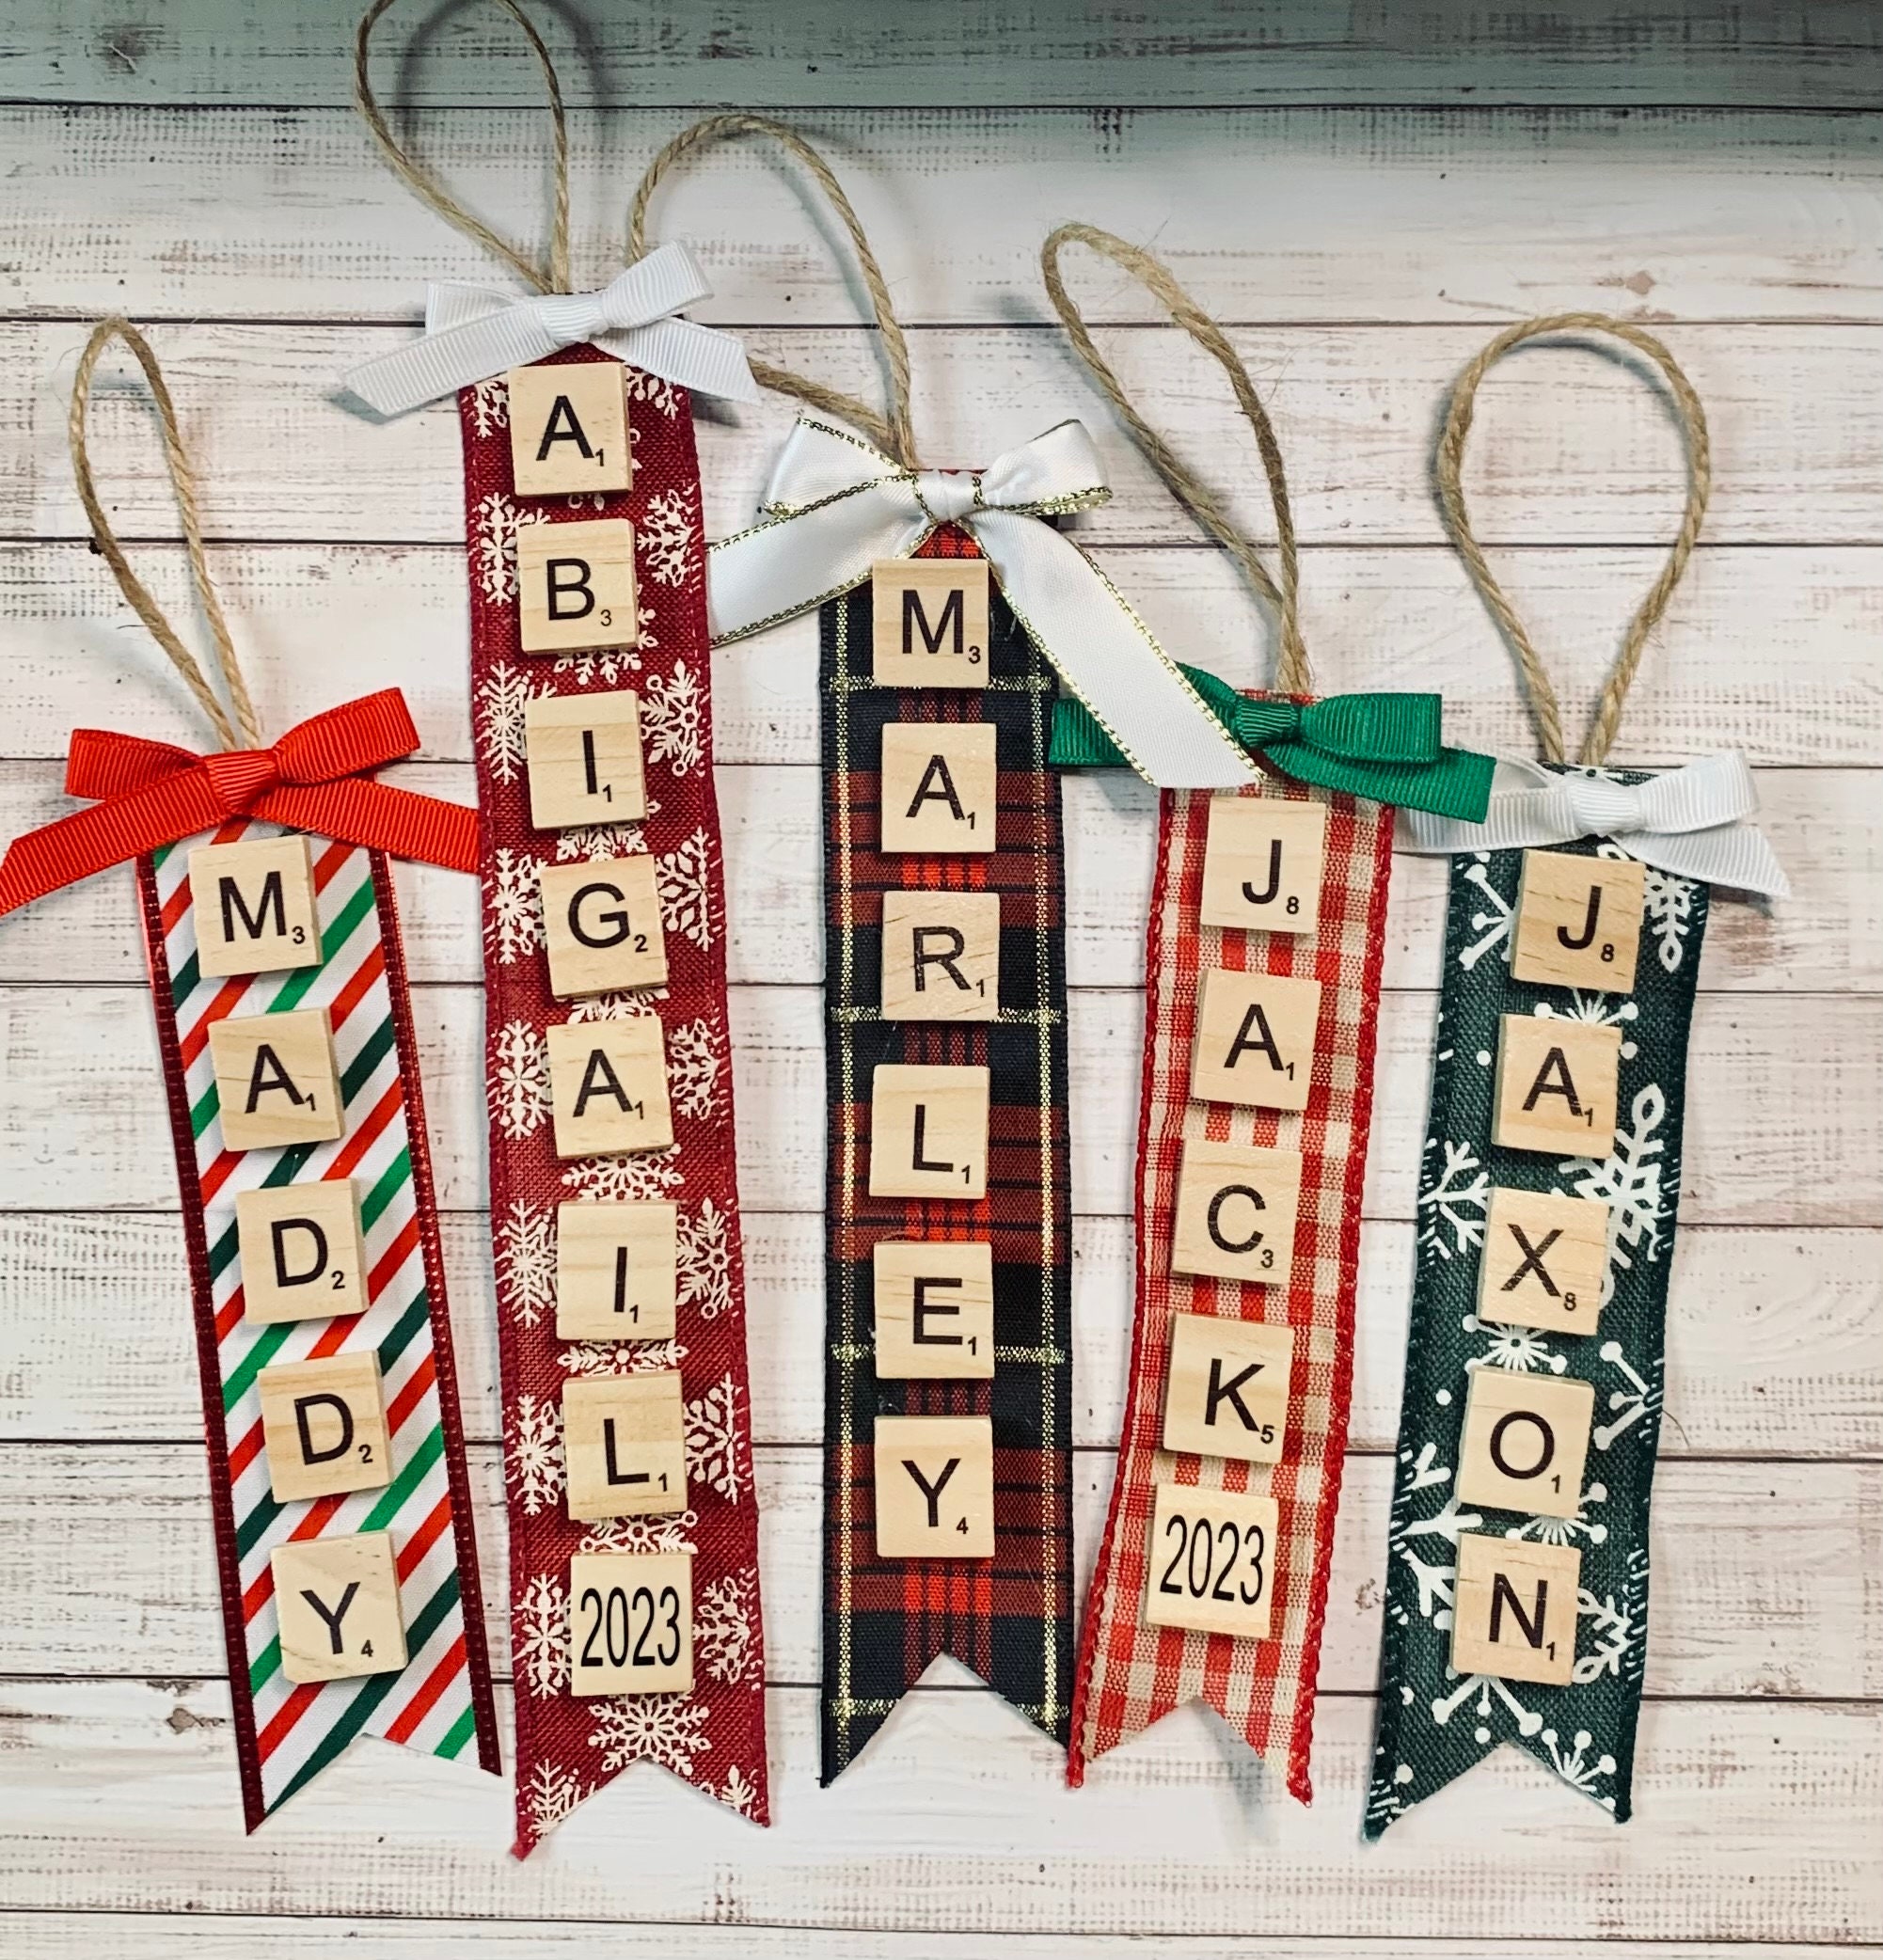 Scrabble Letters DIY Ornaments for Christmas - 